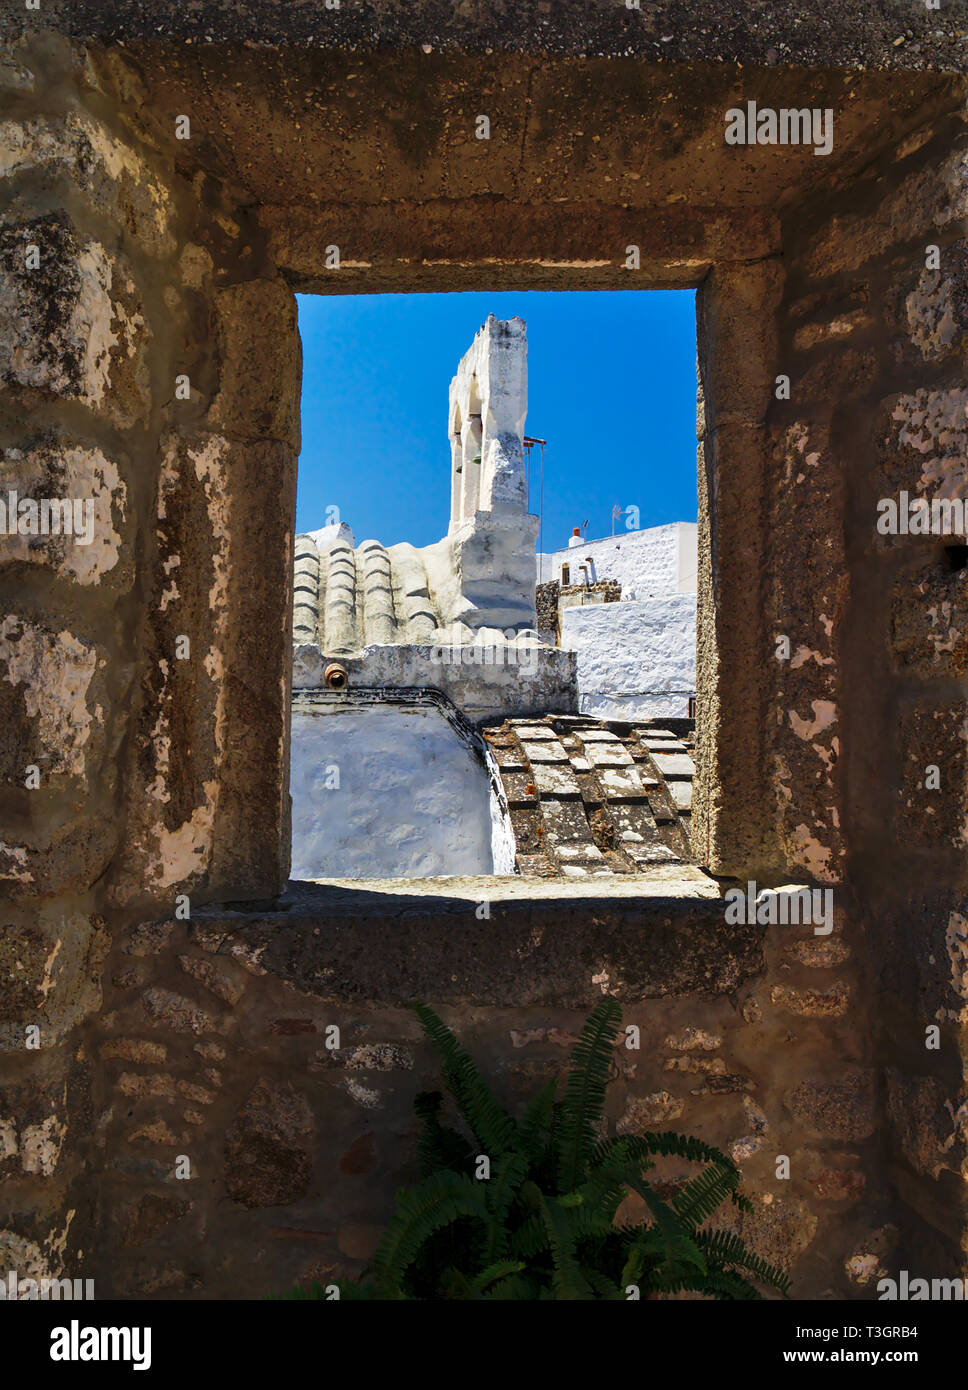 Church bell tower in Patmos island in Greece. Bell tower framed through a window. Stock Photo